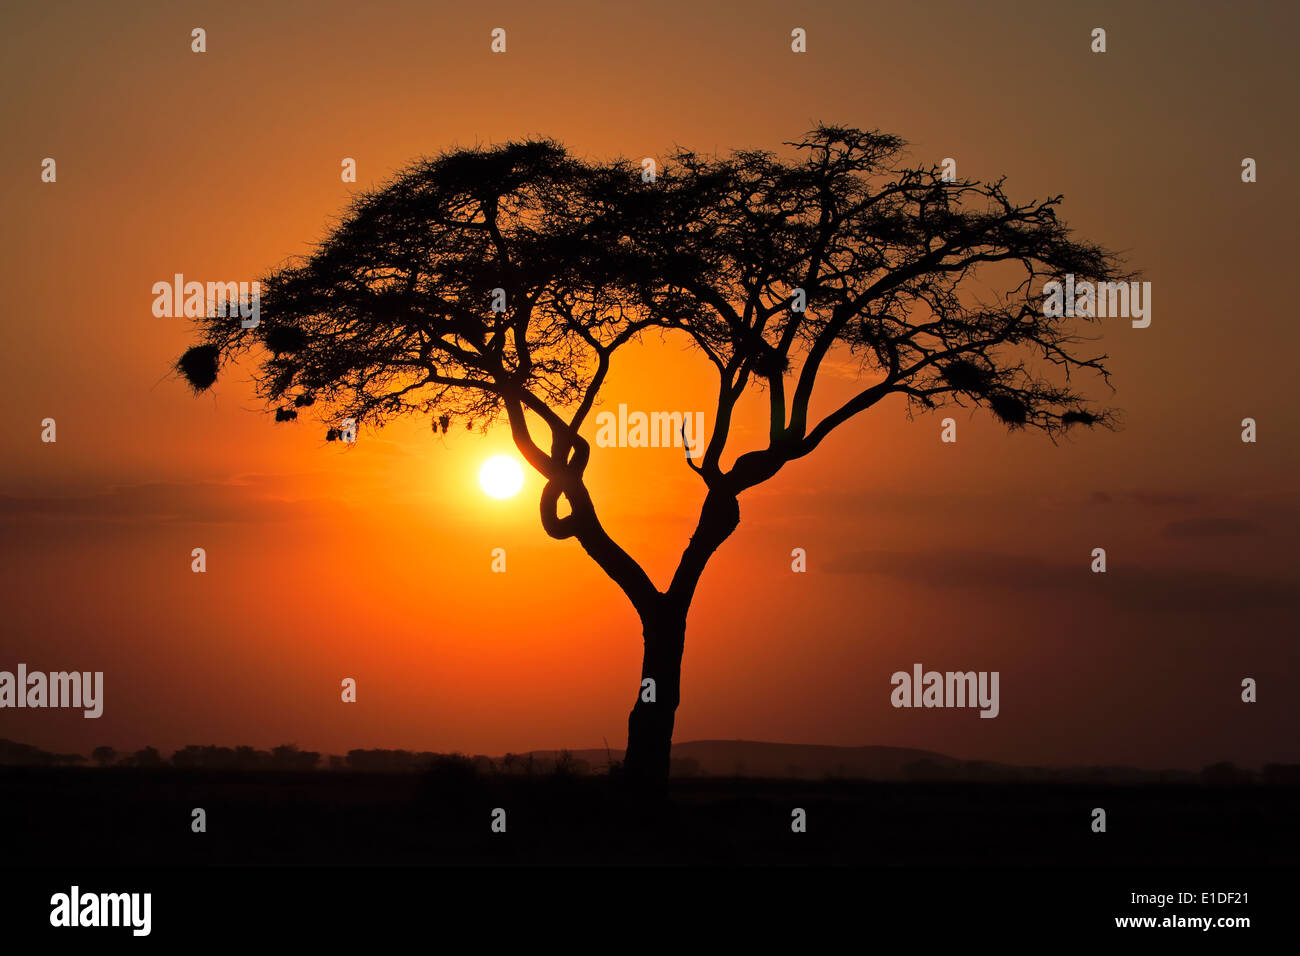 Sunset with silhouetted African Acacia tree, Amboseli National Park, Kenya Stock Photo